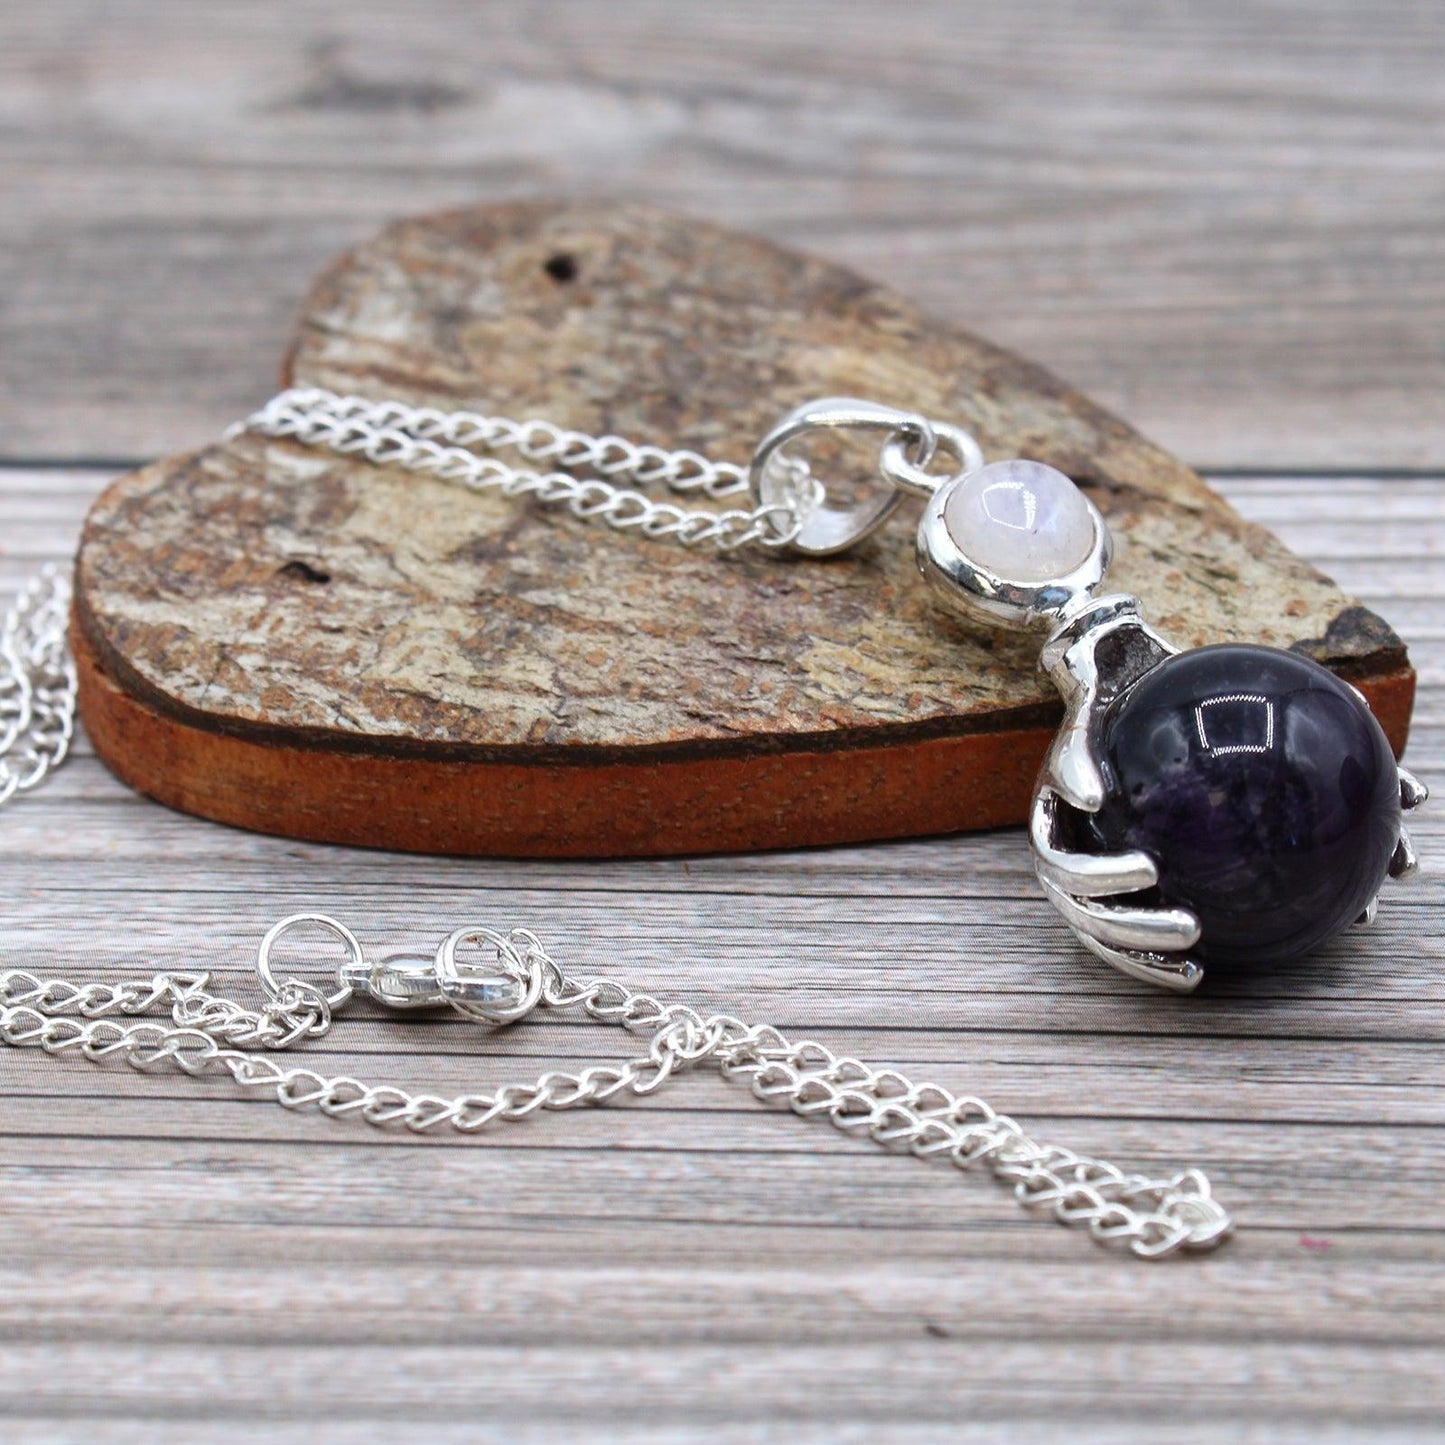 Gemstone Healing Hands Pendant Necklace - Amethyst - Free Pouch